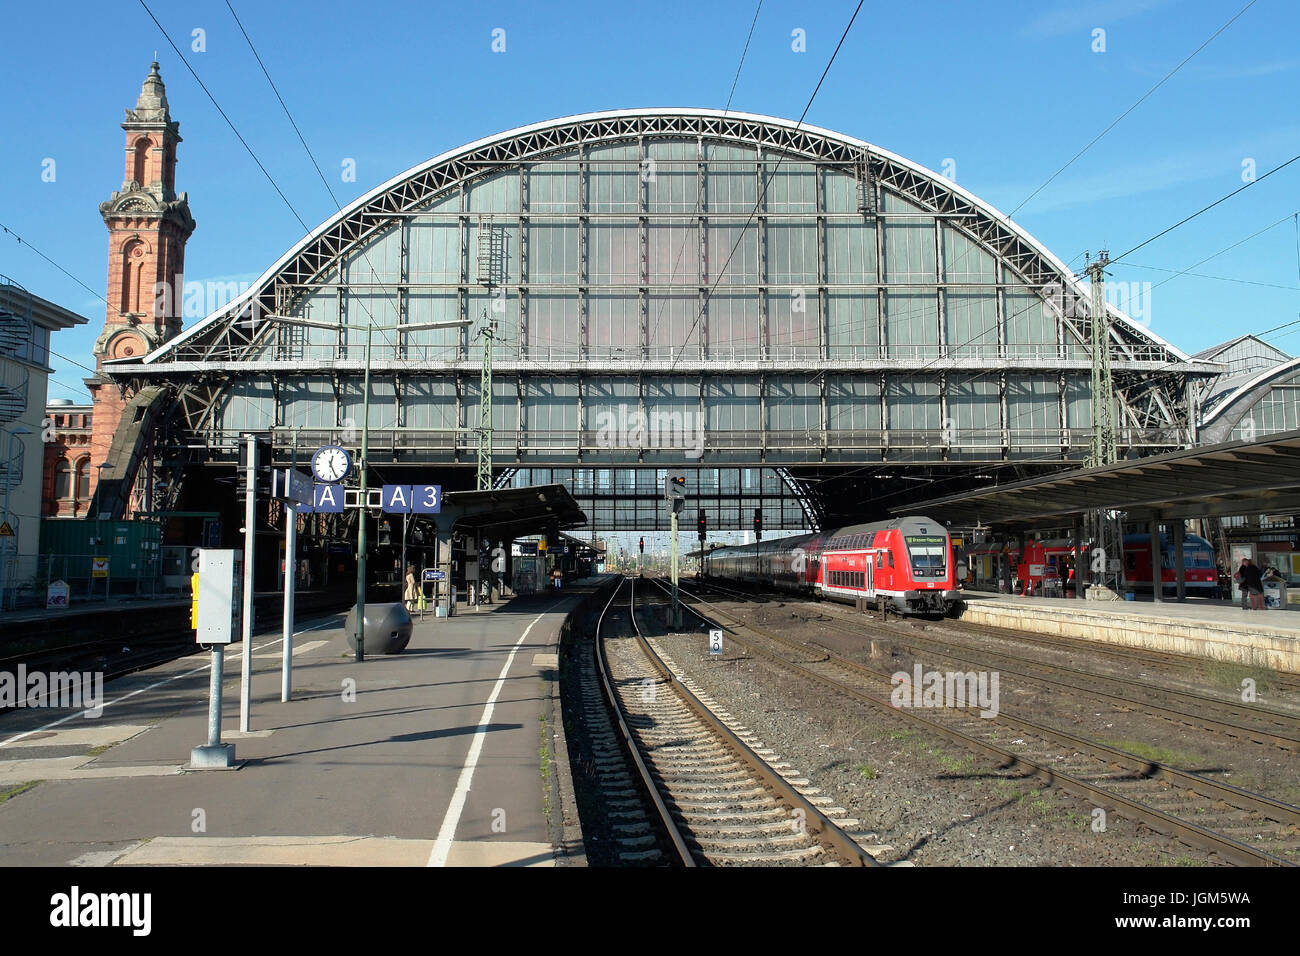 Europe, Germany, Bremen, central station, railway station, train, transport, traffic, building, building, rail, railway tracks, outside, outdoors, day Stock Photo